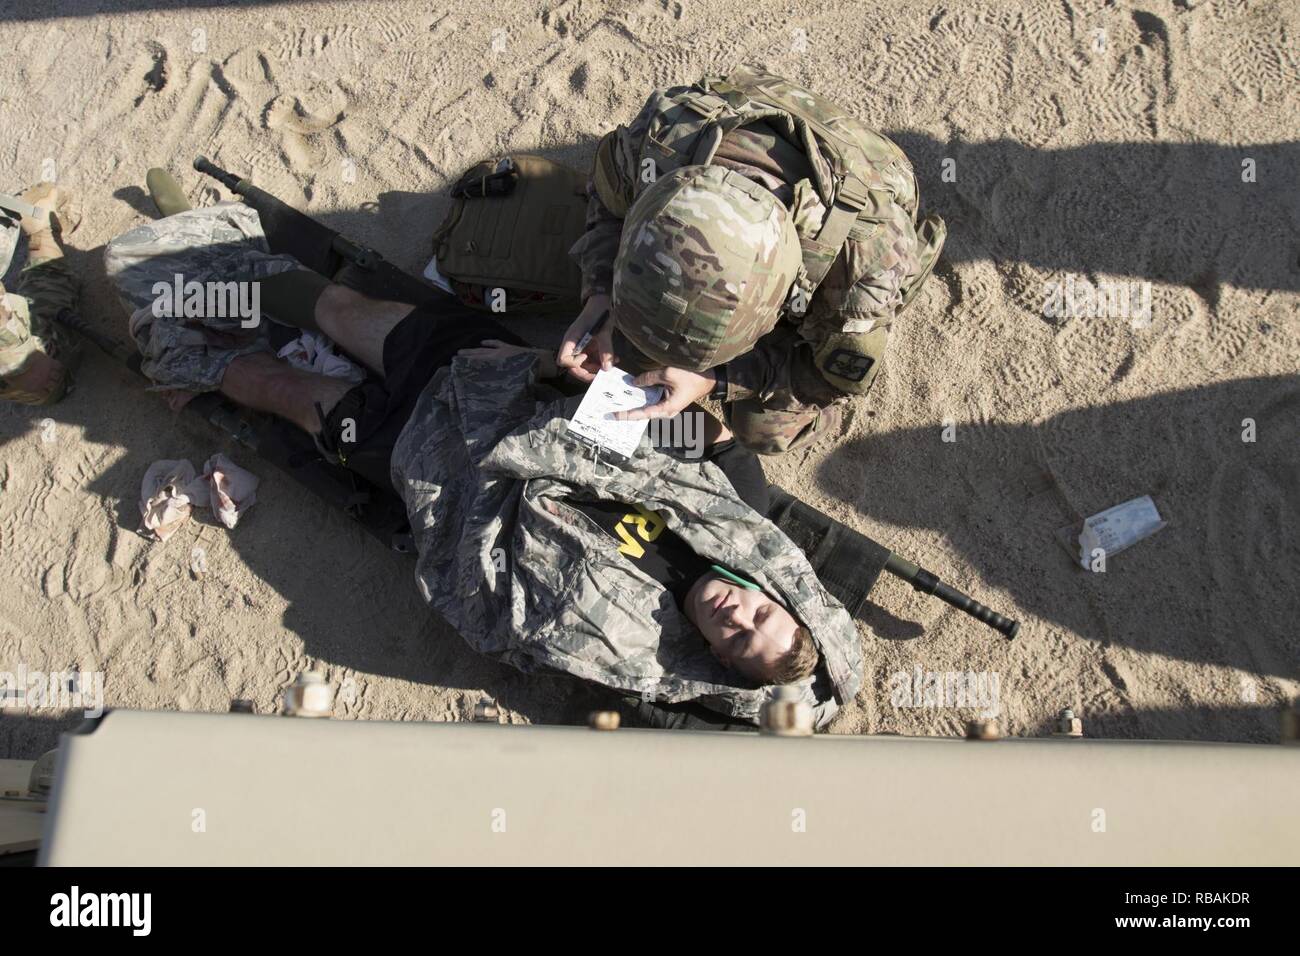 U.S. Army Sgt. Michael B. Drozd, a combat medic assigned to 719th Medical Detachment Veterinary Services, takes notes regarding a simulated casualty during a medical training scenario, Dec. 23, 2018, Camp Arifjan, Kuwait. U.S. Army Central combat medic Soldiers conduct regular training to maintain a high level of combat readiness and proficiency. Stock Photo